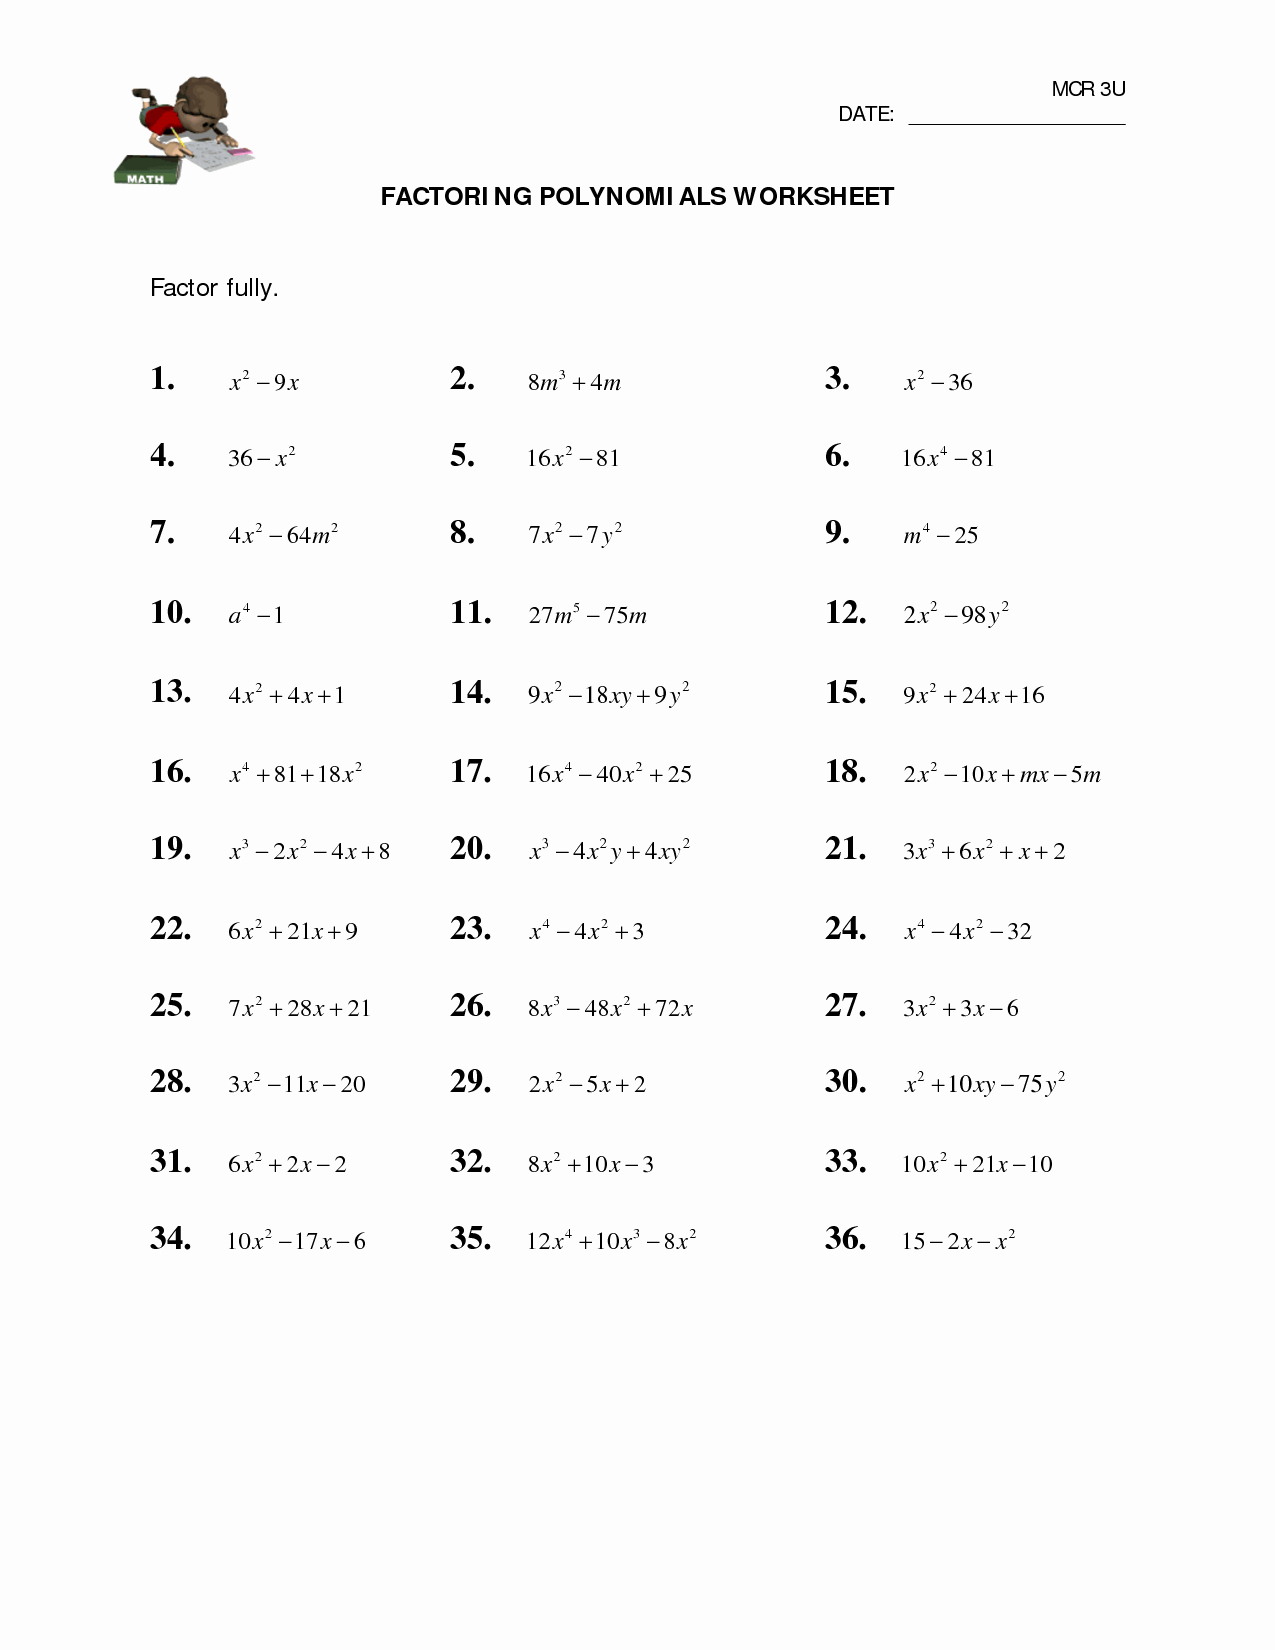 Factoring Polynomials Worksheet with Answers Fresh 10 Best Of Factoring Polynomials Practice Worksheet